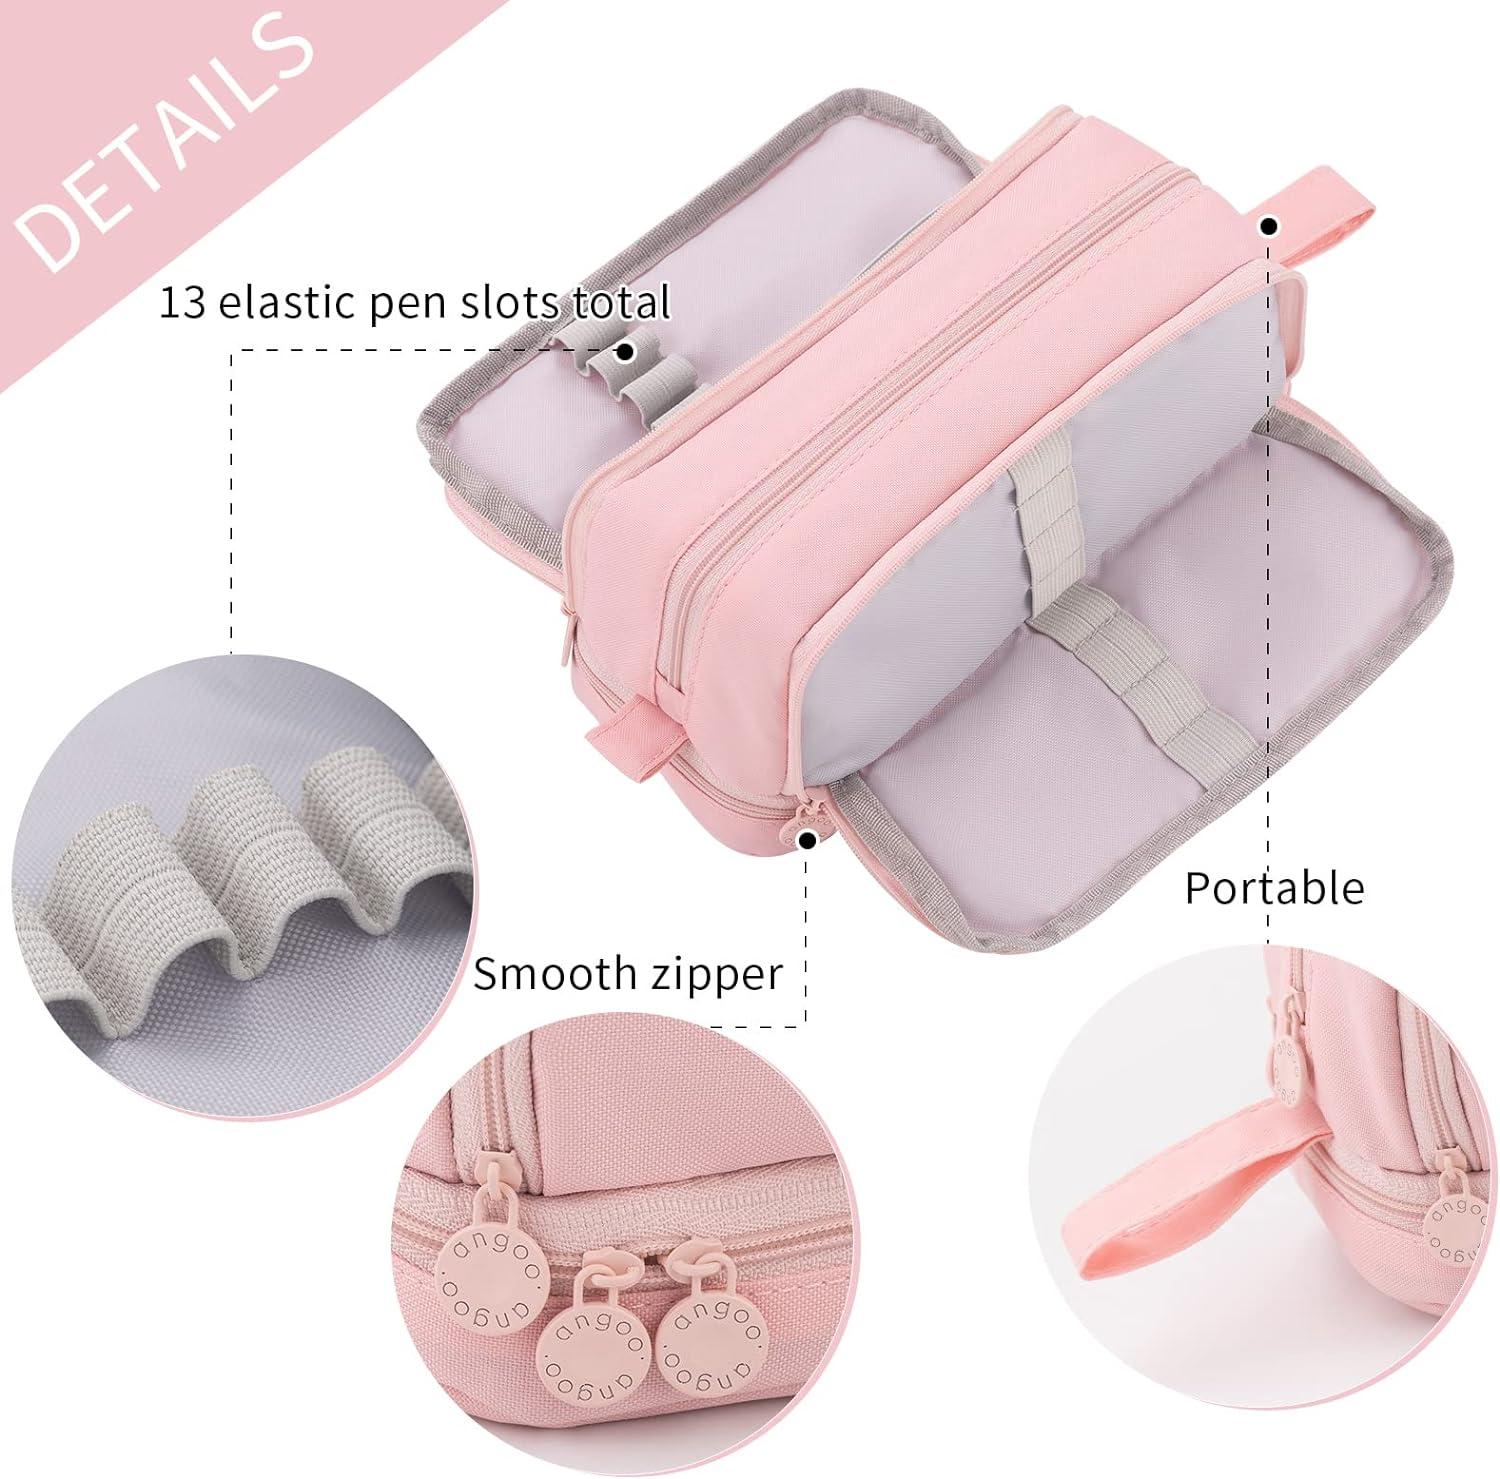 Cicimelon Large Capacity Pencil Case 3 Compartments Pen Pouch Pencil Bag for Students Girls Adults Women (Pink)